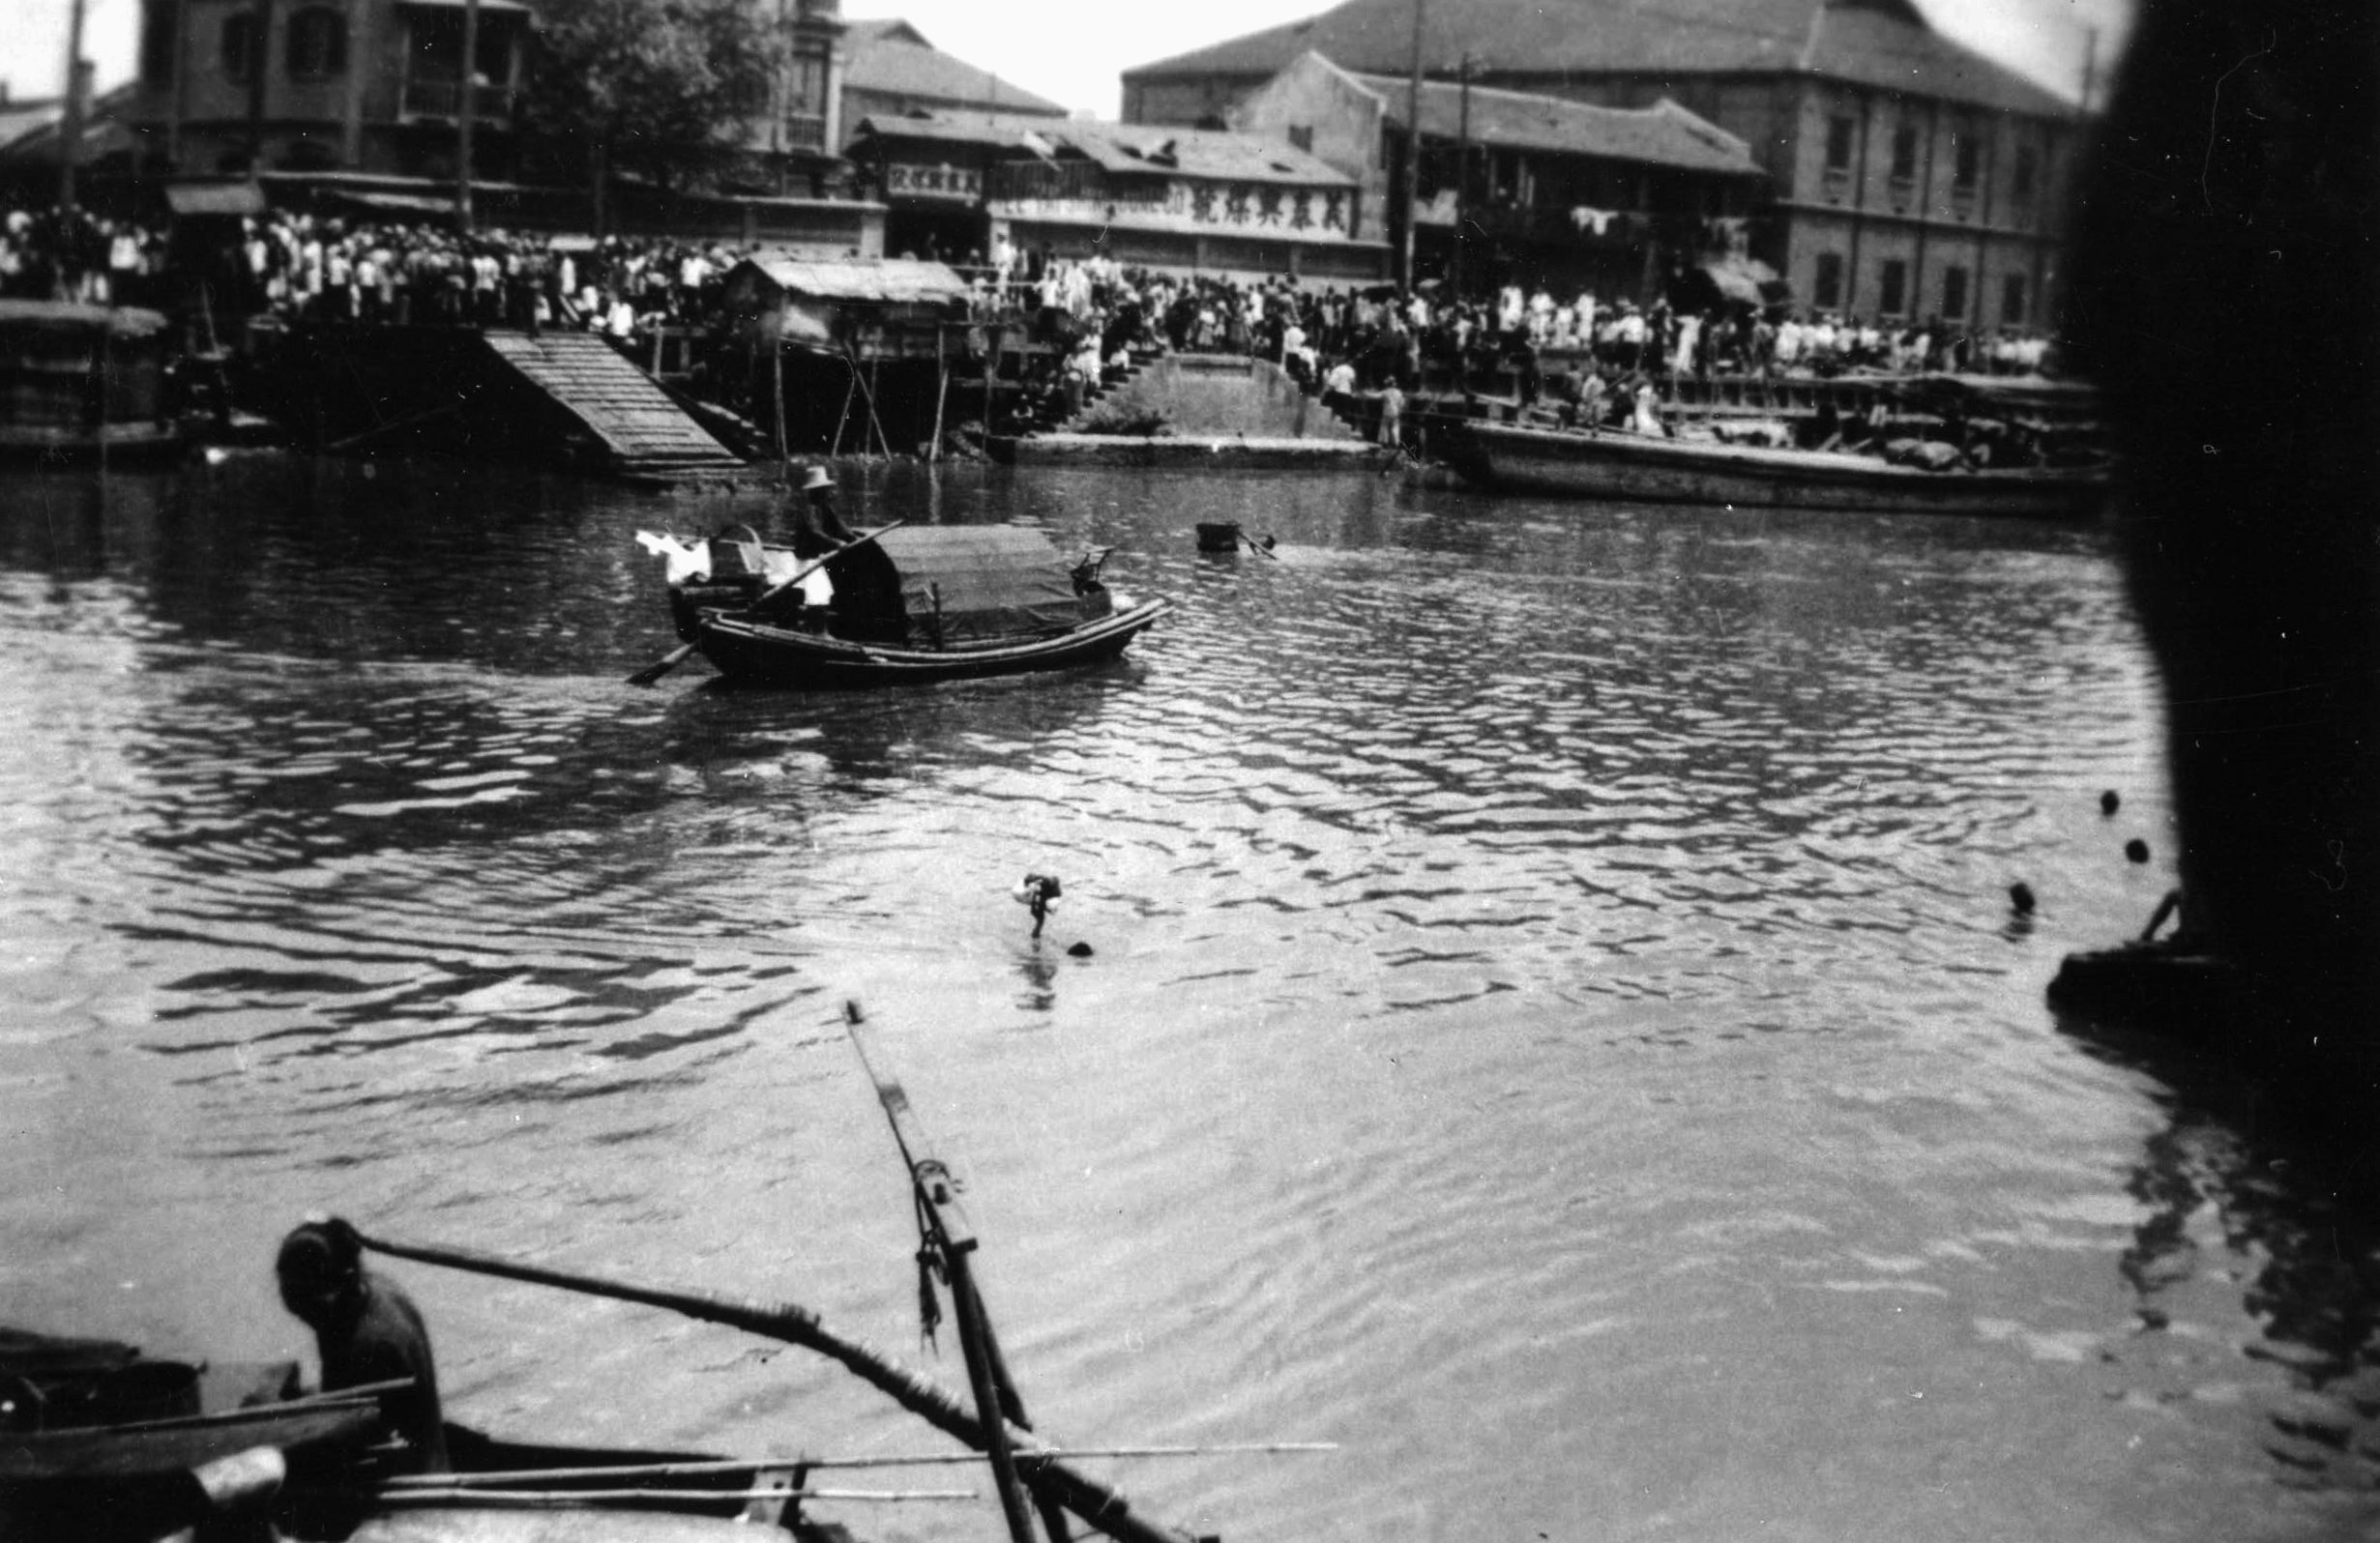 Crowding the banks of Soochow Creek, near Shanghai’s International Settlement, sampans carry Chinese civilians attempting to escape the Japanese by water. The Chinese often formed boat trains to navigate the creek to safety. (National Archives))